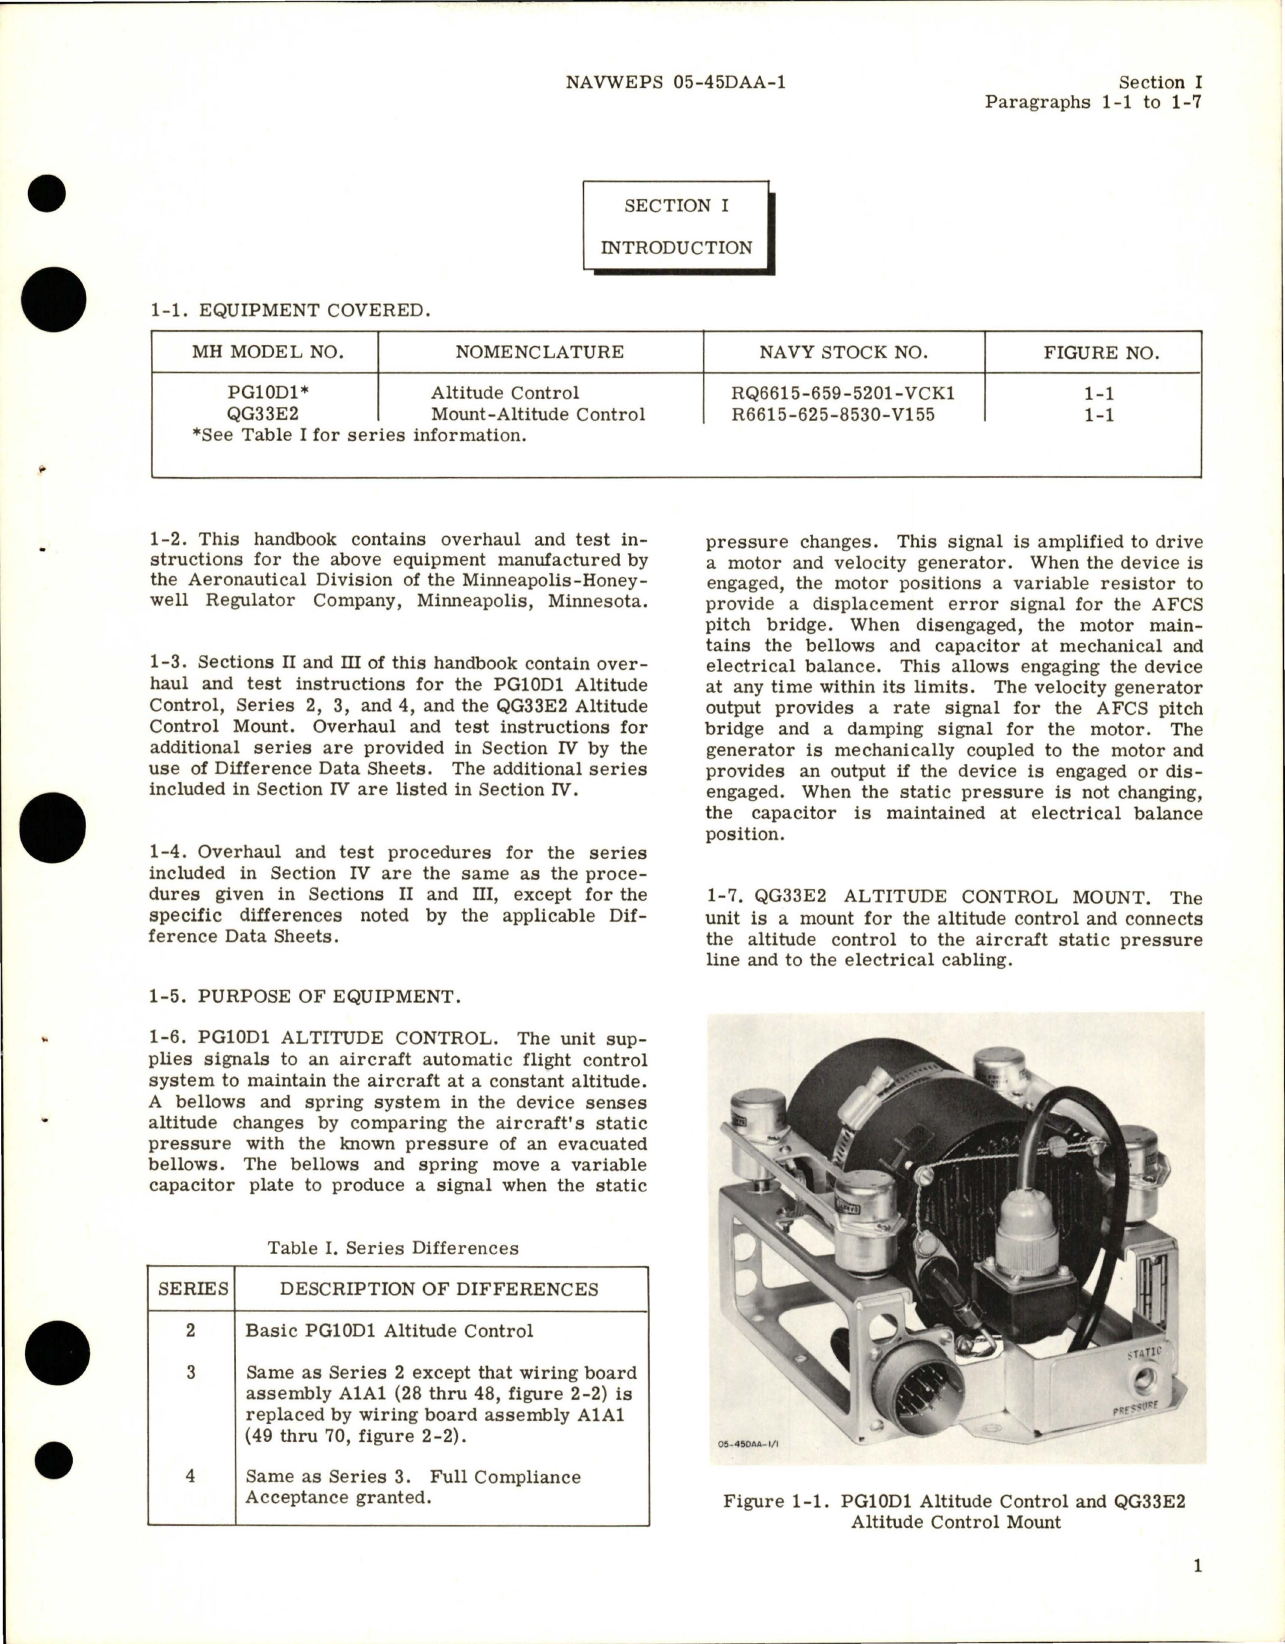 Sample page 5 from AirCorps Library document: Overhaul Instructions for Altitude Control - PG10D1 and Altitude Control Mount - QG33E2